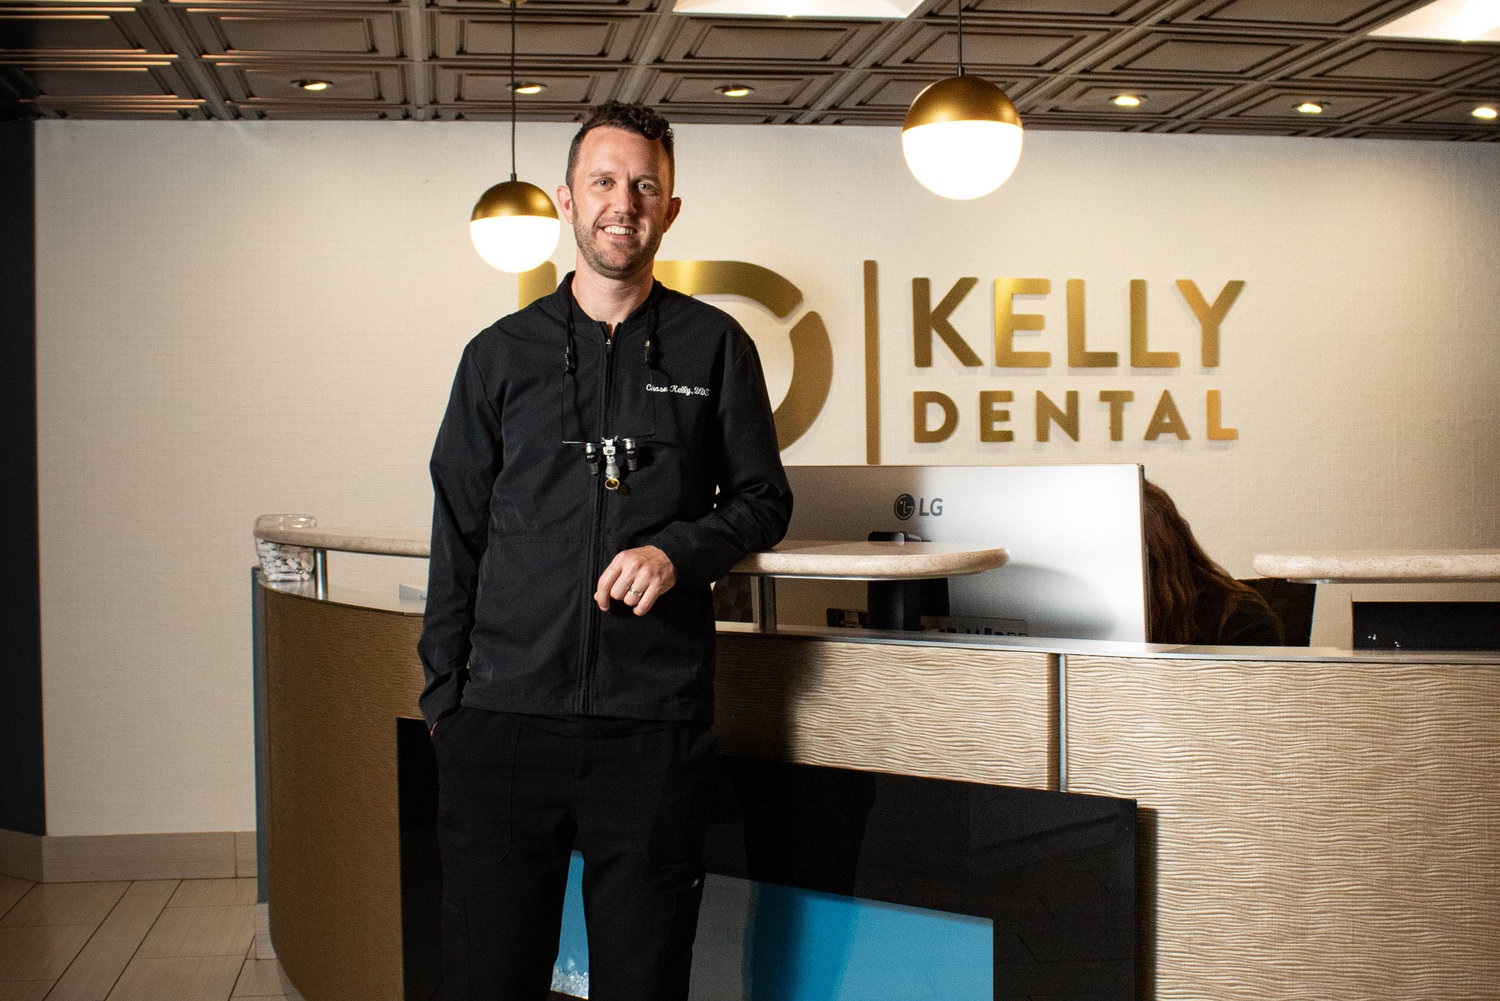 OFFICE SPACE: Kelly Dental has plenty of room to fill at its new 5,300-square-foot facility, says owner Dr. Chase Kelly.